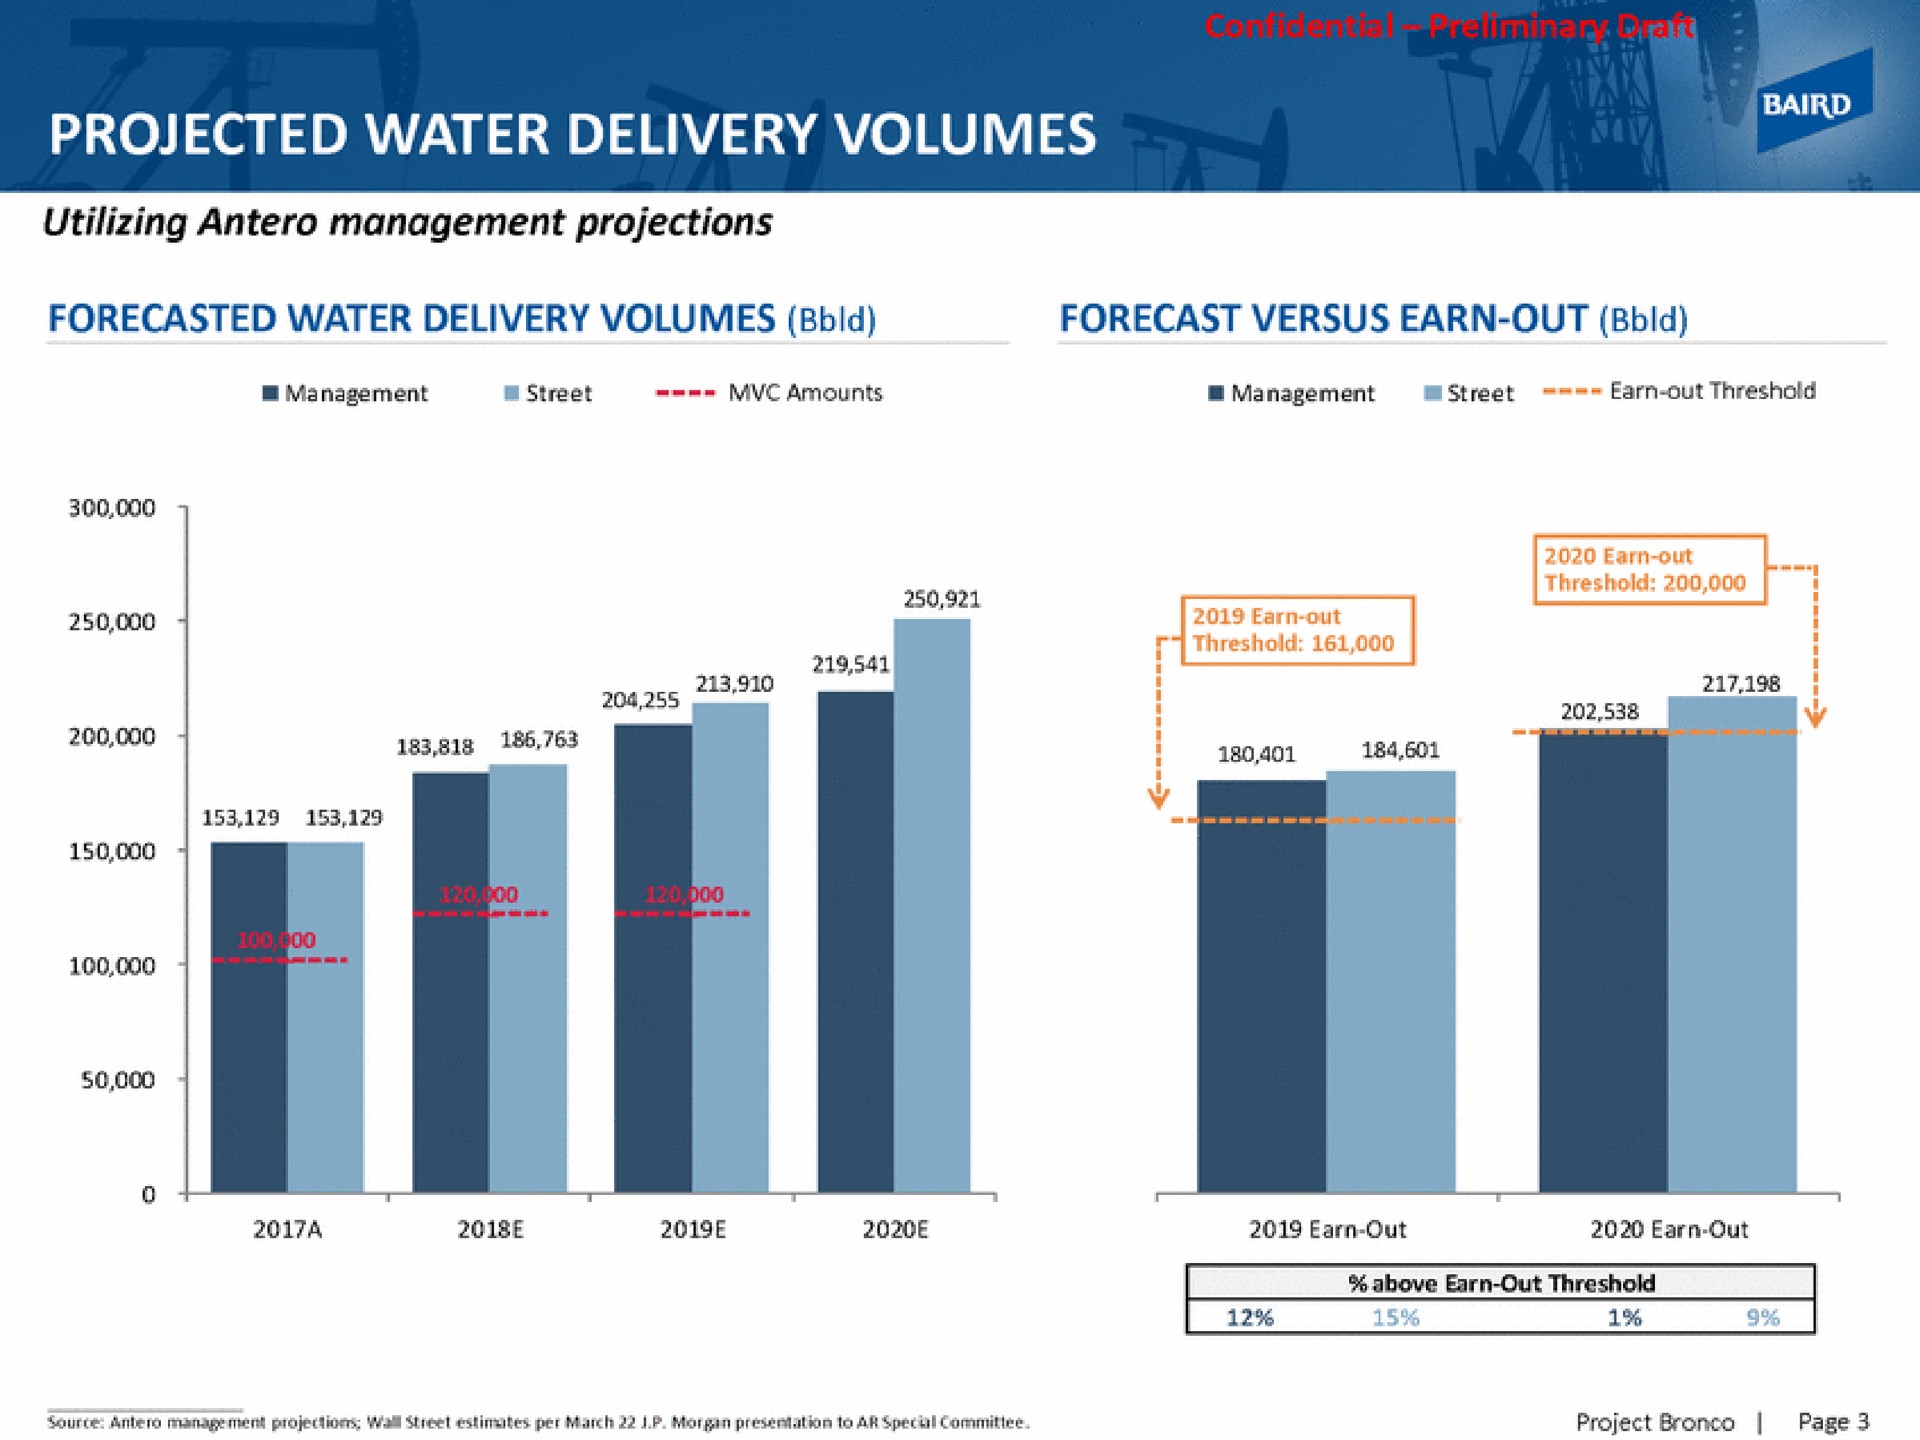 projected water delivery volumes forecasted water delivery volumes forecast versus earn out | Baird